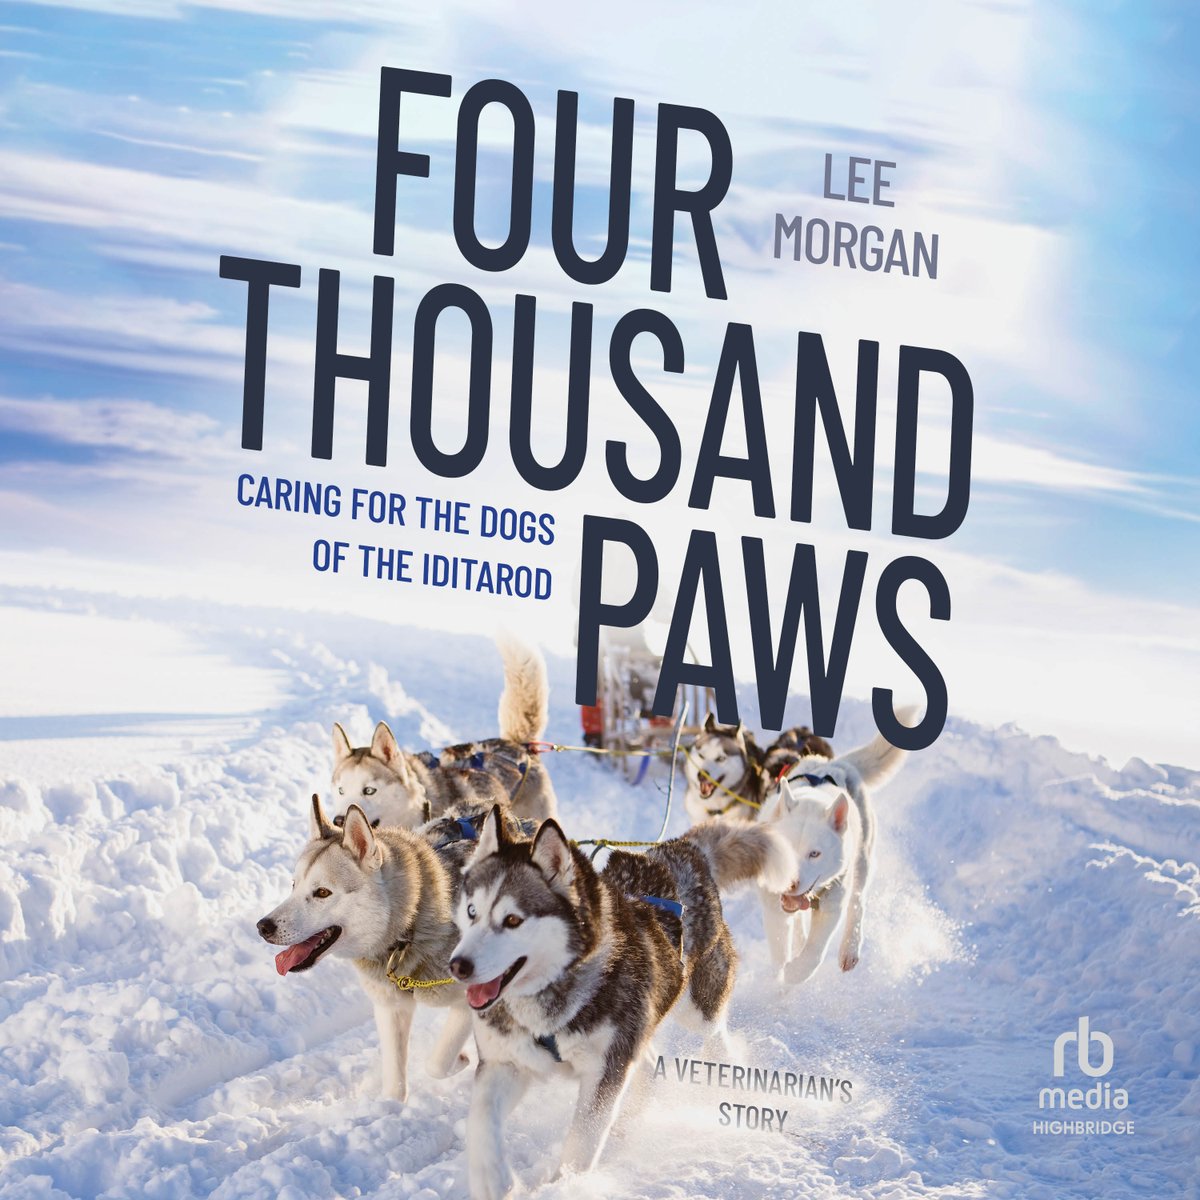 An intimate look inside the animal mind, and an exciting new account of a storied race. highbridgeaudio.com/fourthousandpa… performed by Danny Campbell #newrelease #audiobook #sleddogs #Alaska